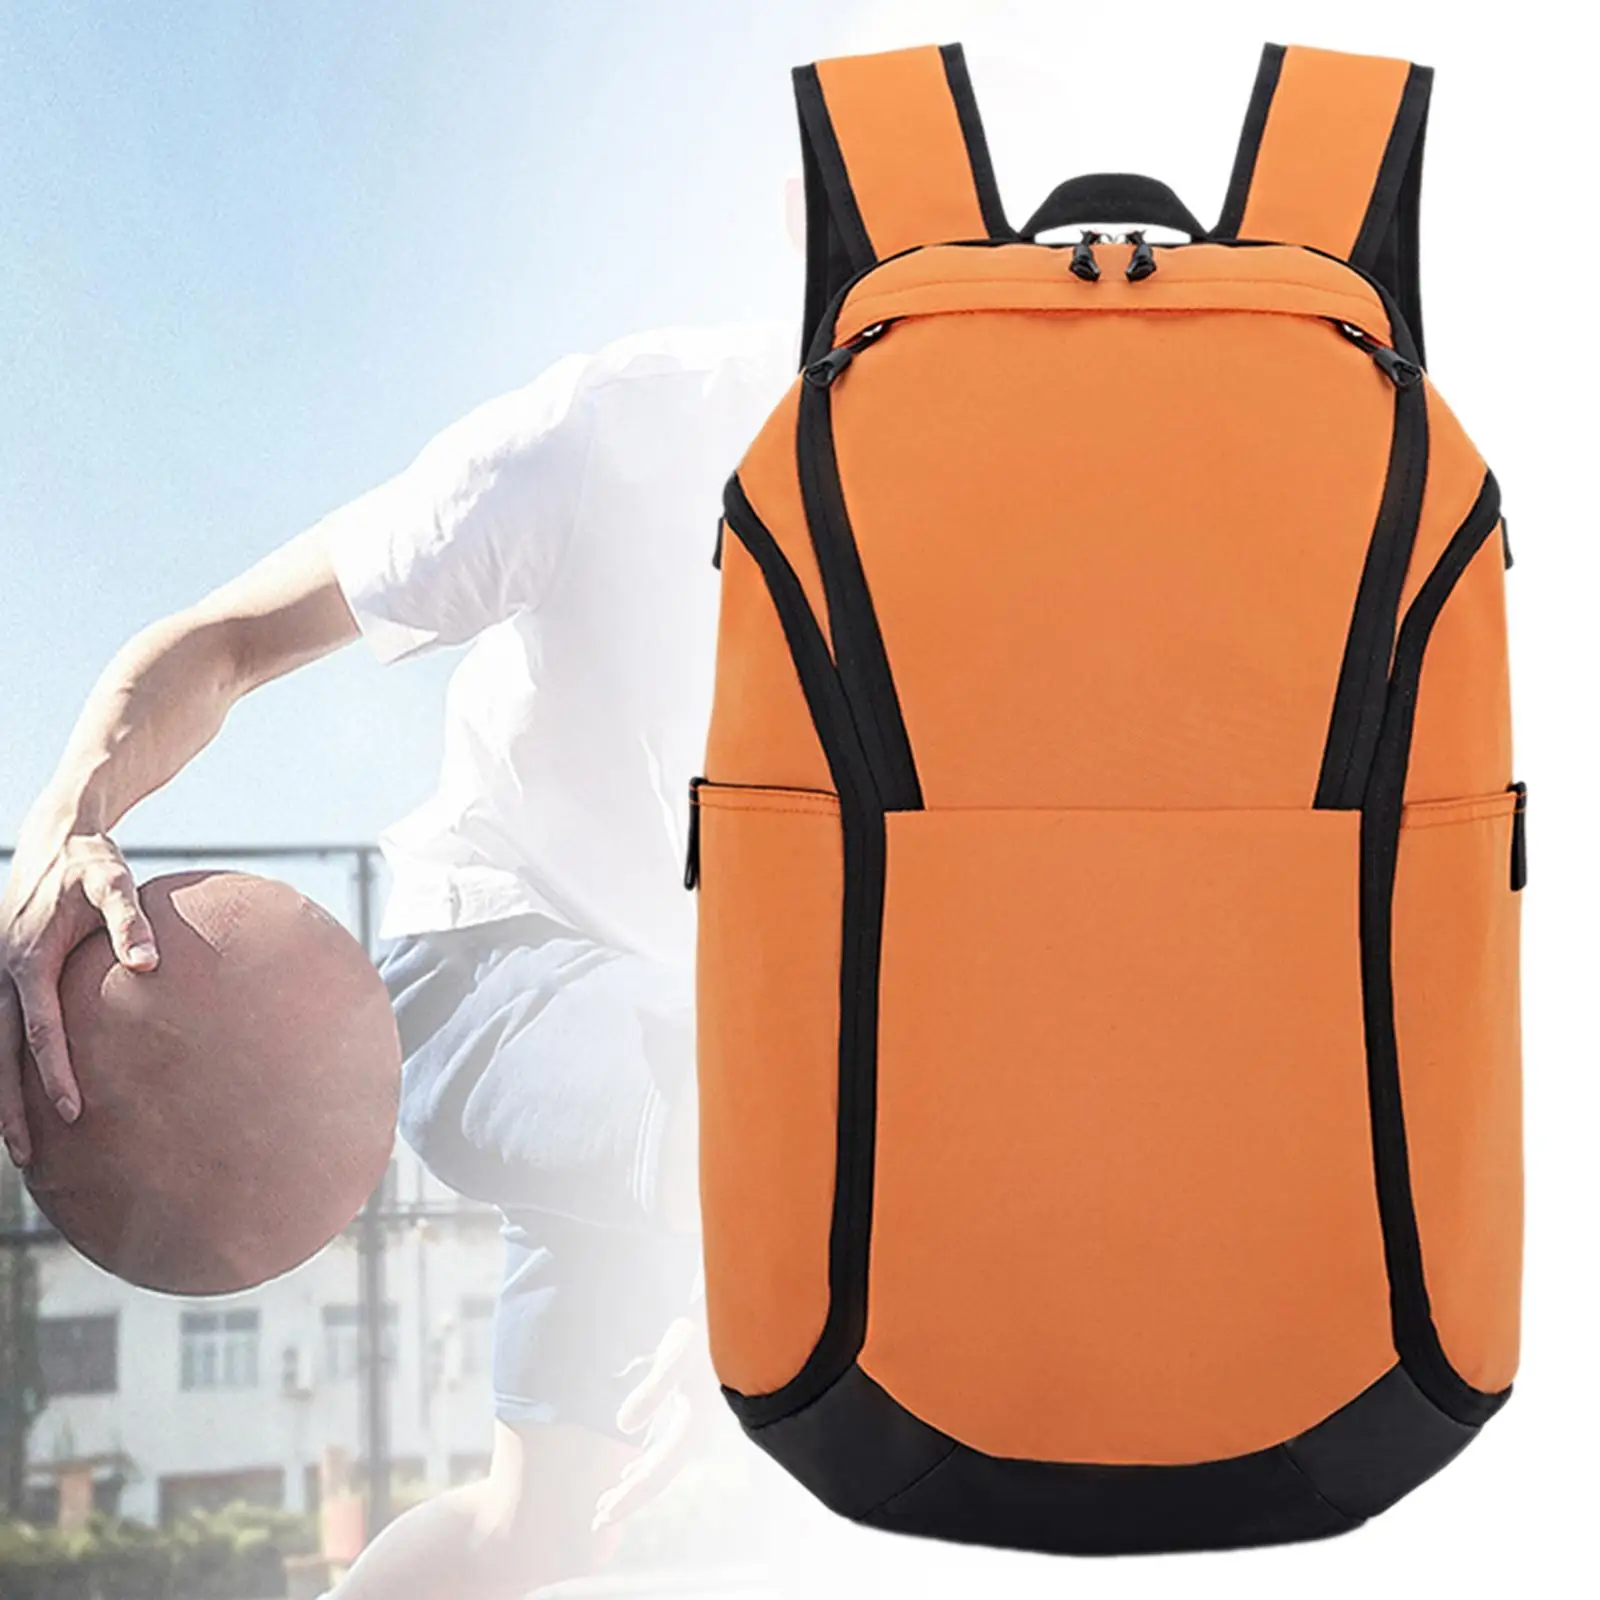 Basketball Backpack Large Sports Bag for Men Women Athletes Soccer Bag with Ball Compartment for Soccer Travel Outdoor Cycling